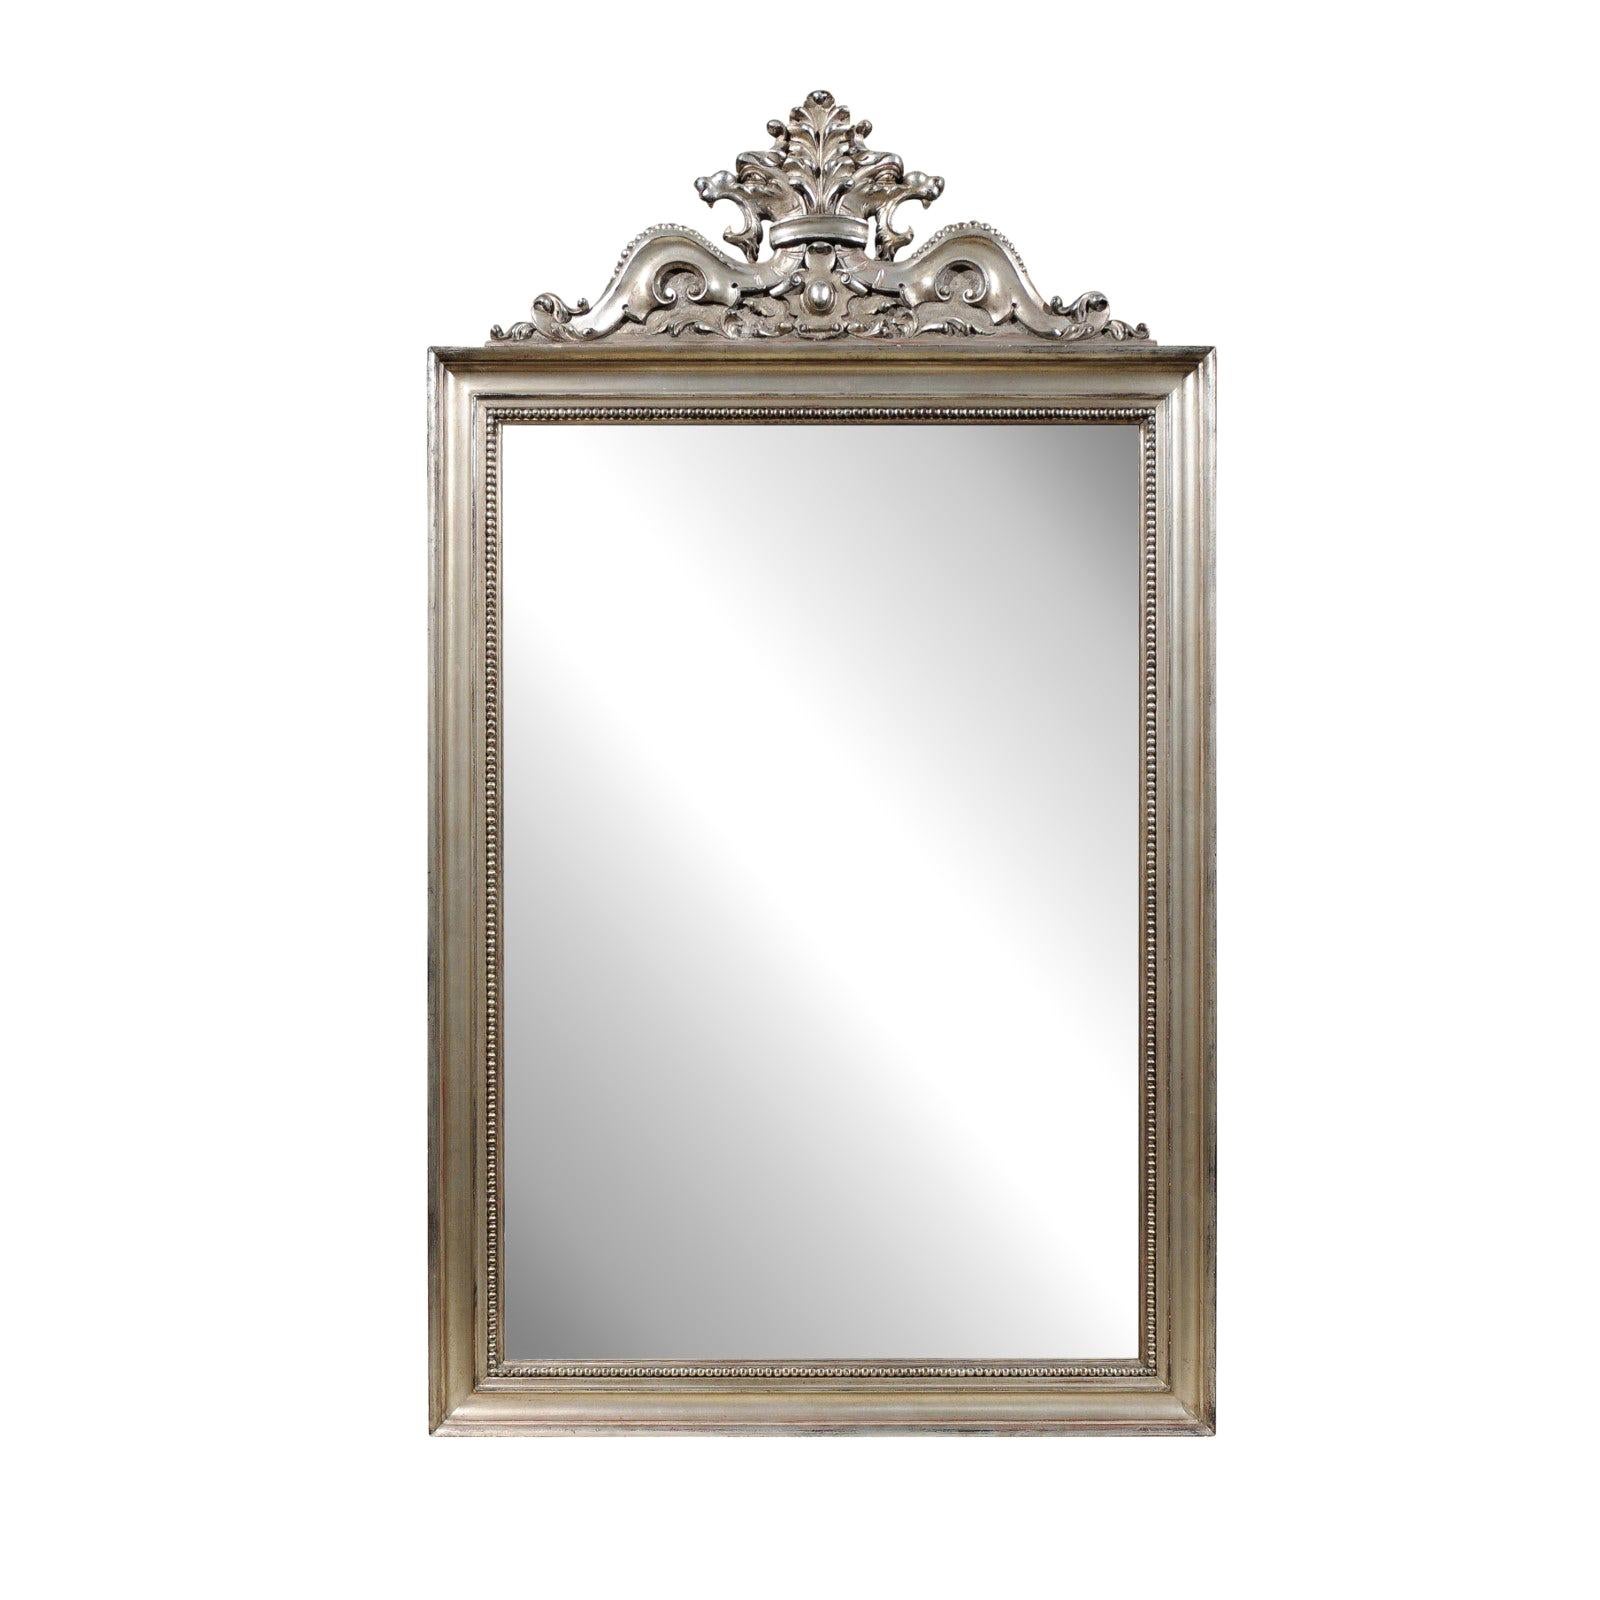 Contemporary Crested Mirror with Rocailles Motifs and Antiqued Silver Finish